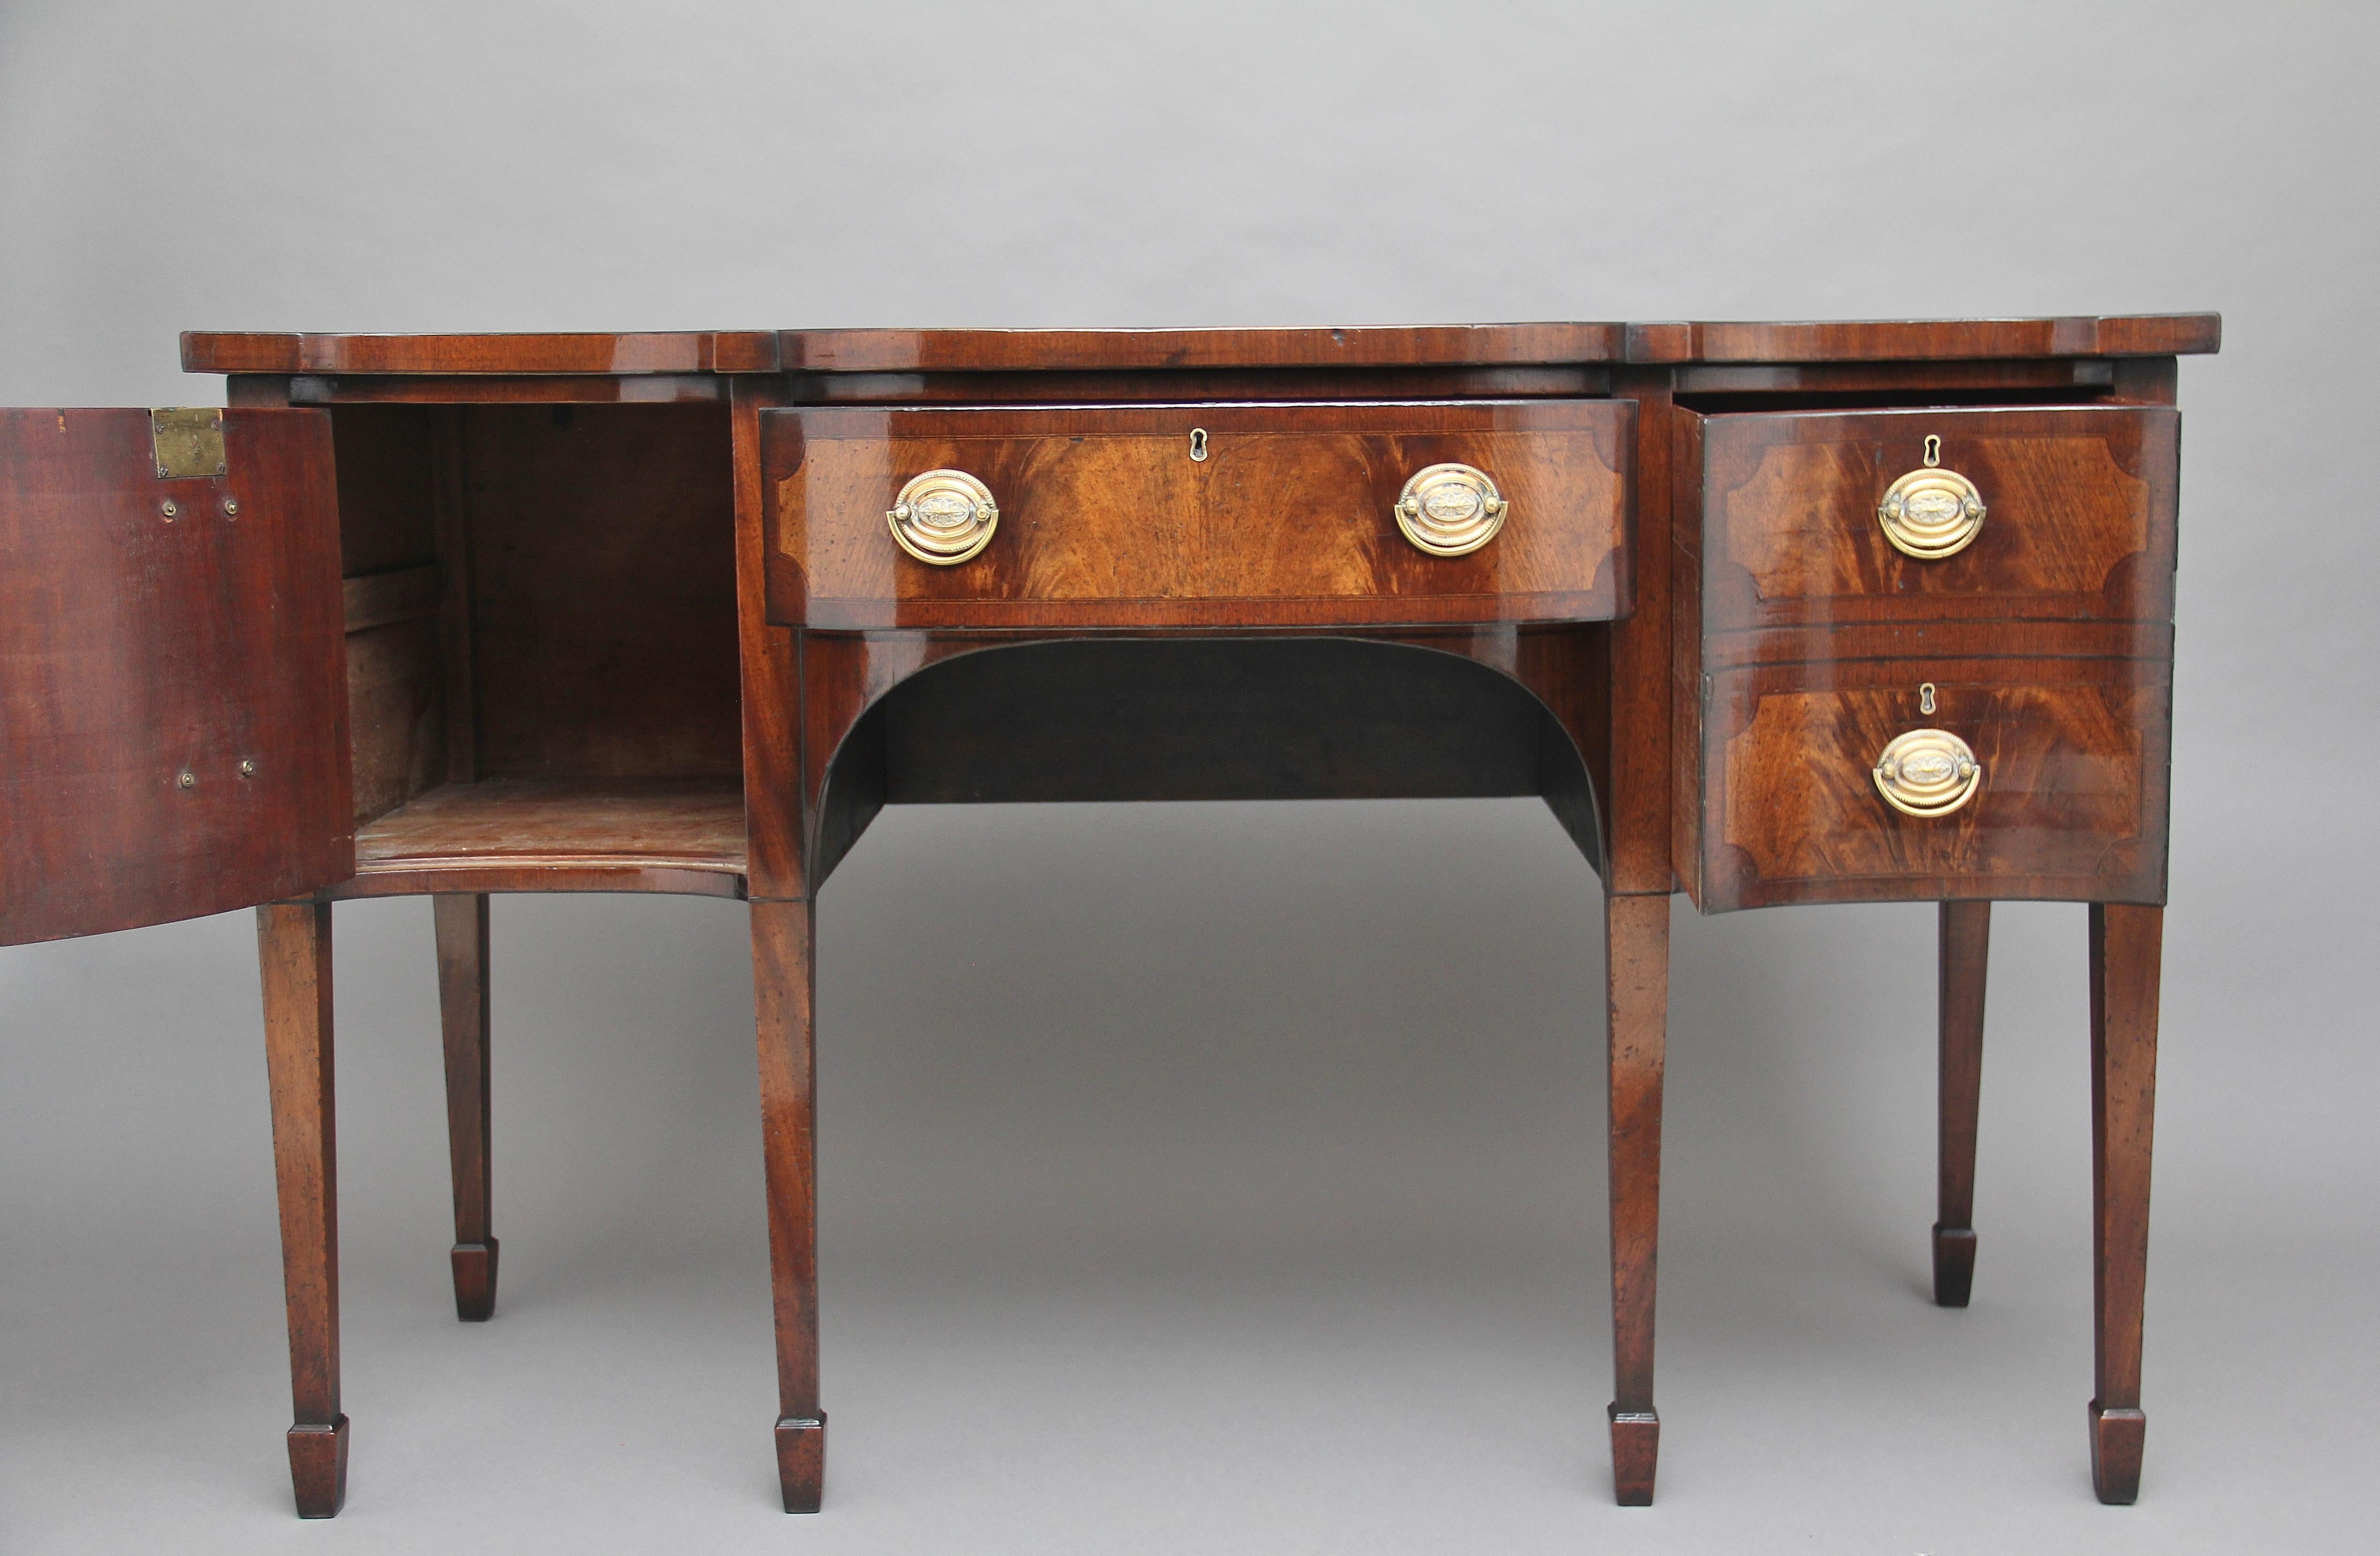 19th century mahogany sideboard of serpentine form, having a lovely shaped figured top crossbanded around the edge and inlaid with boxwood lines, with a drawer at the centre, to the left is a cupboard with a hinged door and a deep drawer to the